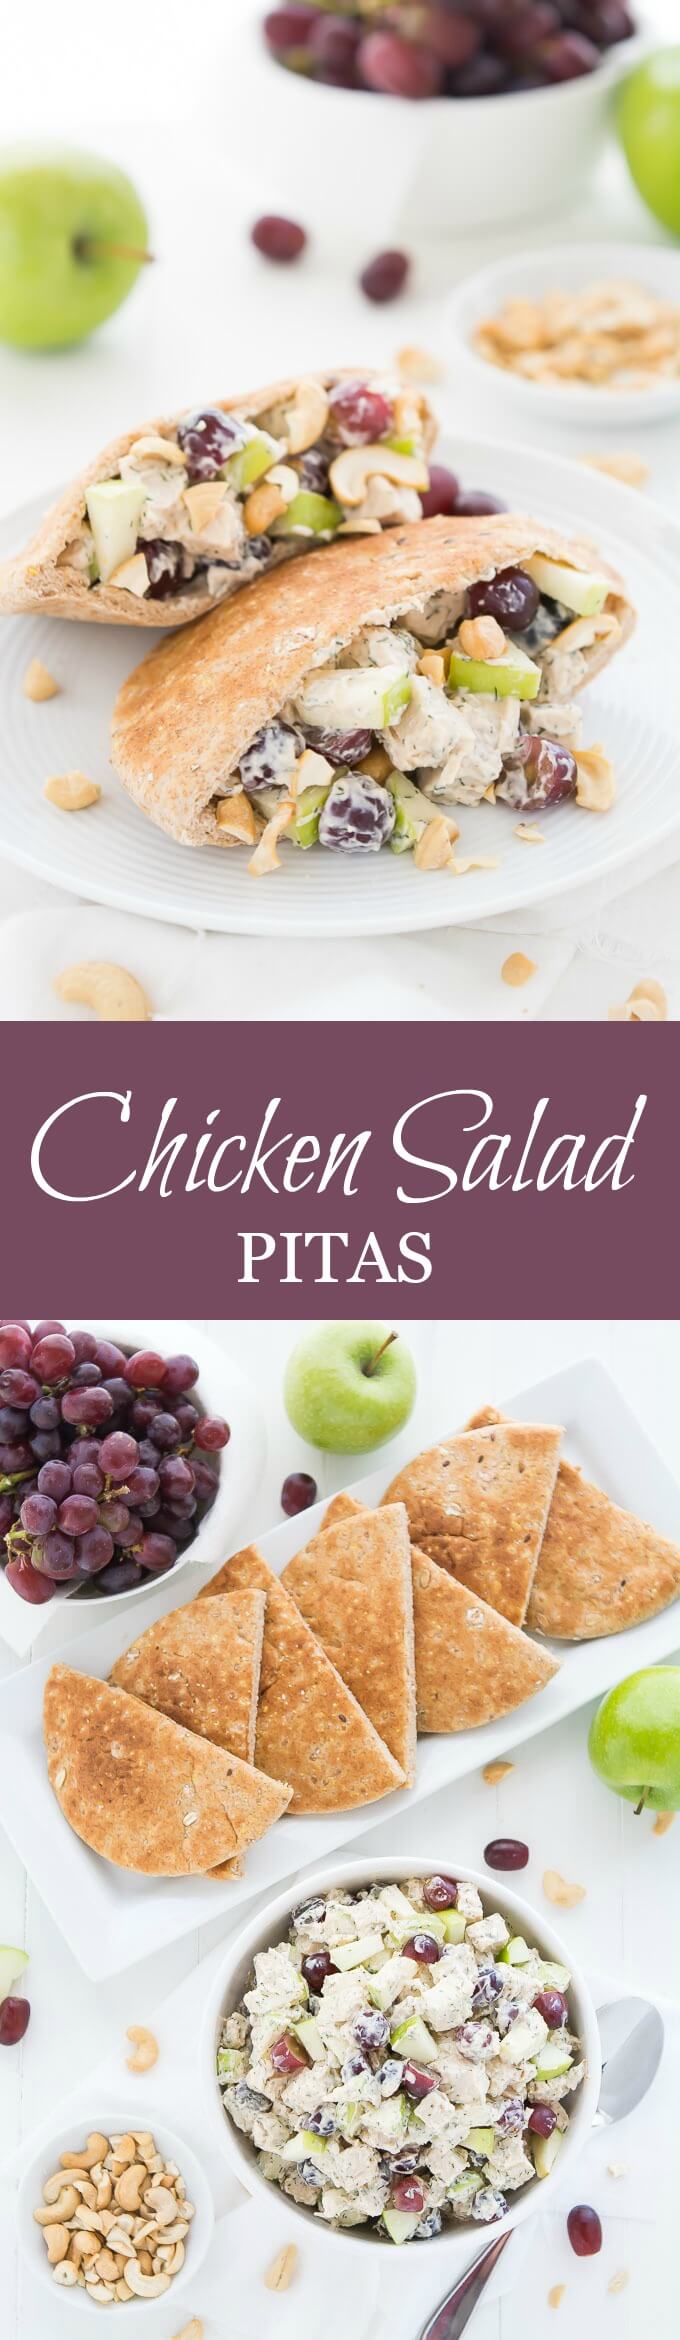 Chicken Salad Pitas are a delicious lunch or dinner made healthy using Greek yogurt and canola oil mayonnaise.